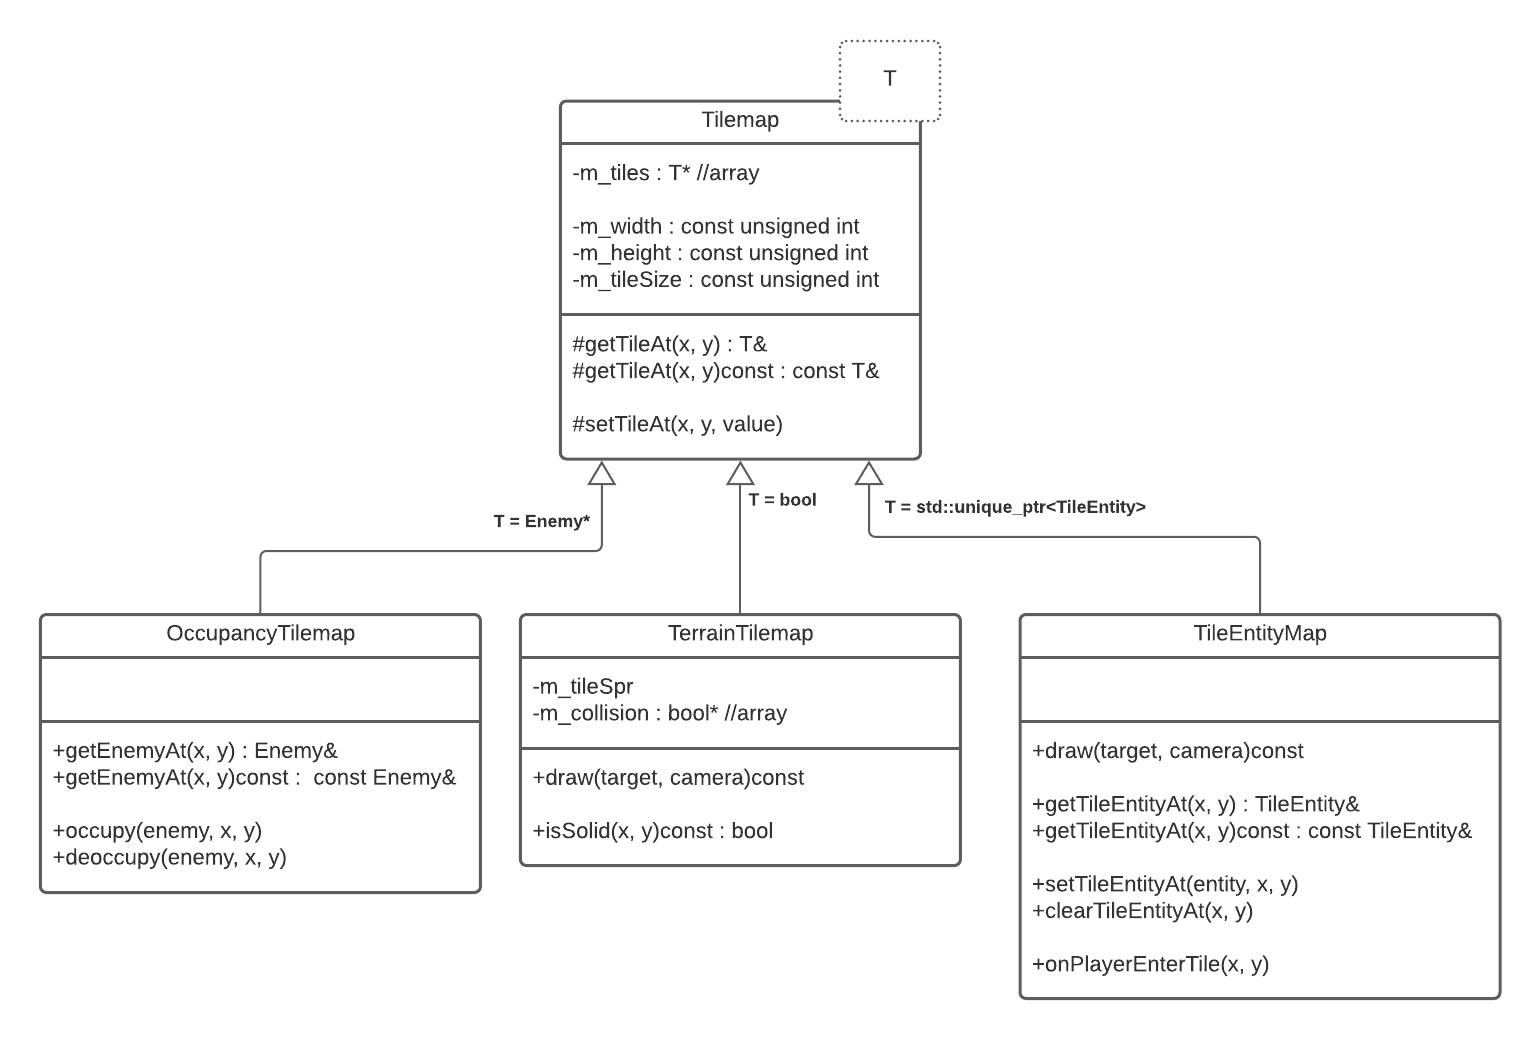 UML class diagram of the different Tilemaps in the code